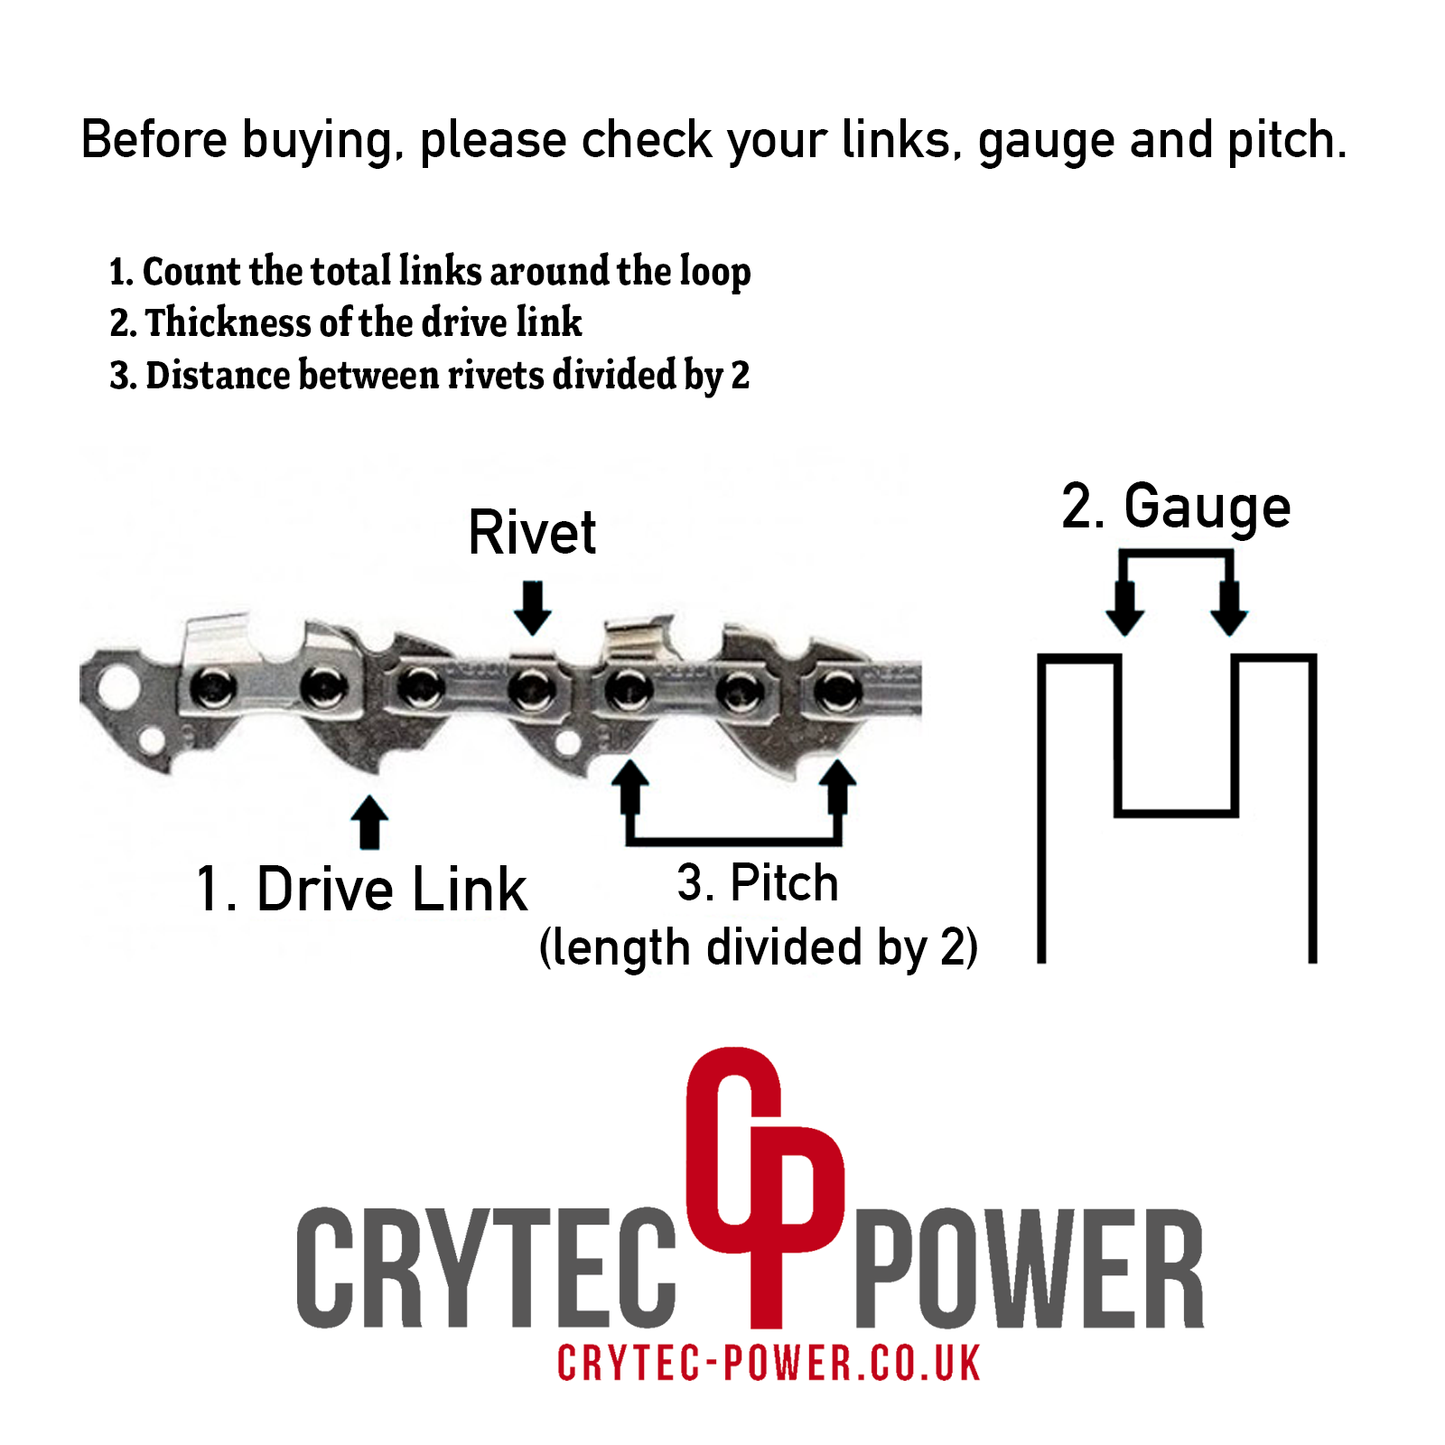 Crytec Power CHAINSAW CHAIN *PACK OF 2 CHAINS* FITS HUSQVARNA 390XP 038 24" BAR